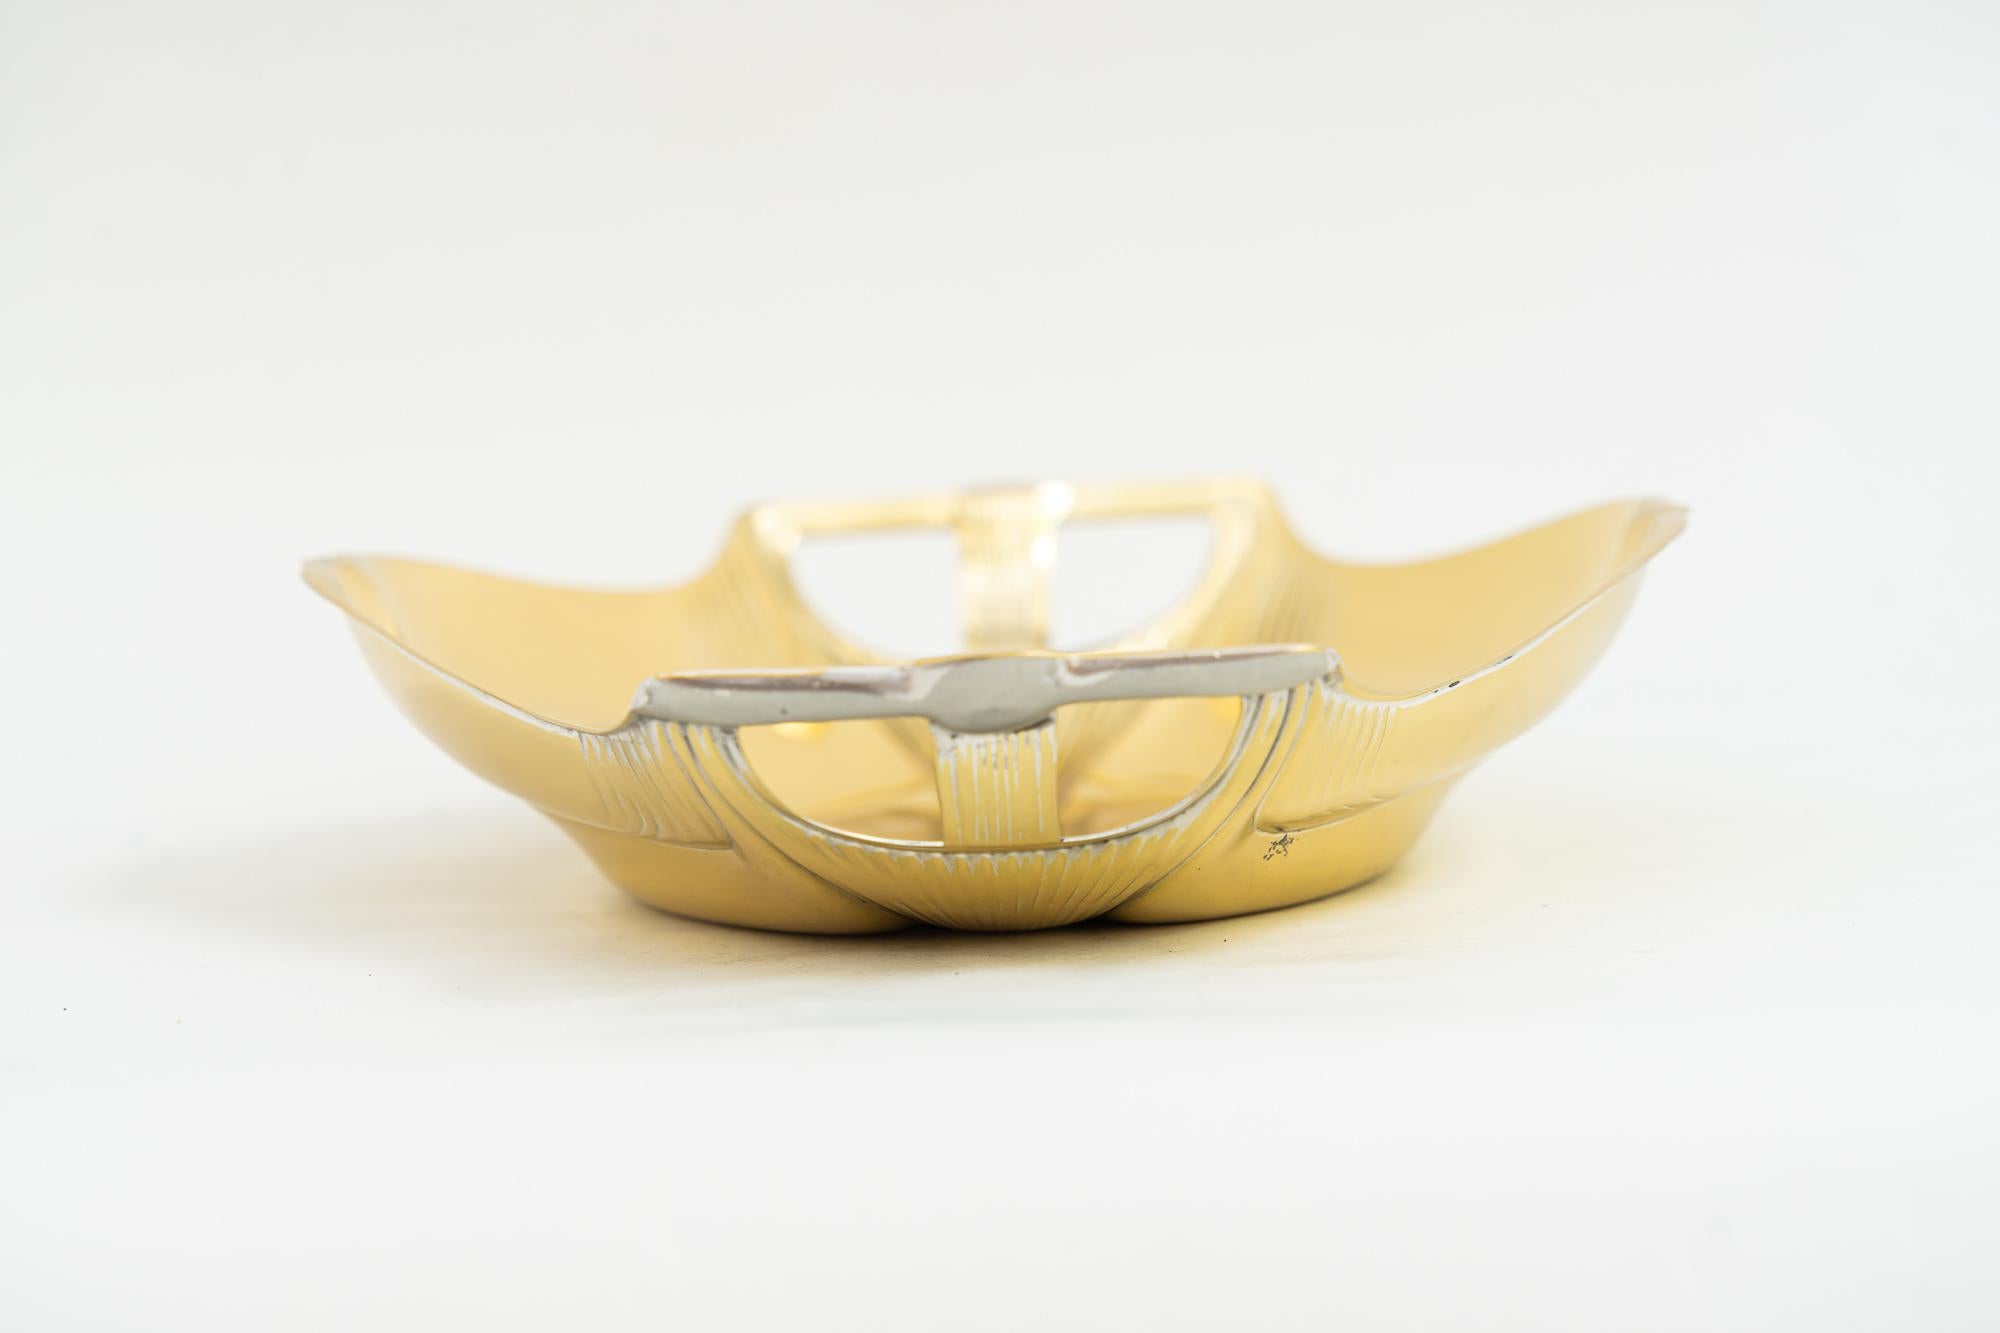 Art Deco fruit bowl, Vienna, around 1920s
Polished and stove enamelled.